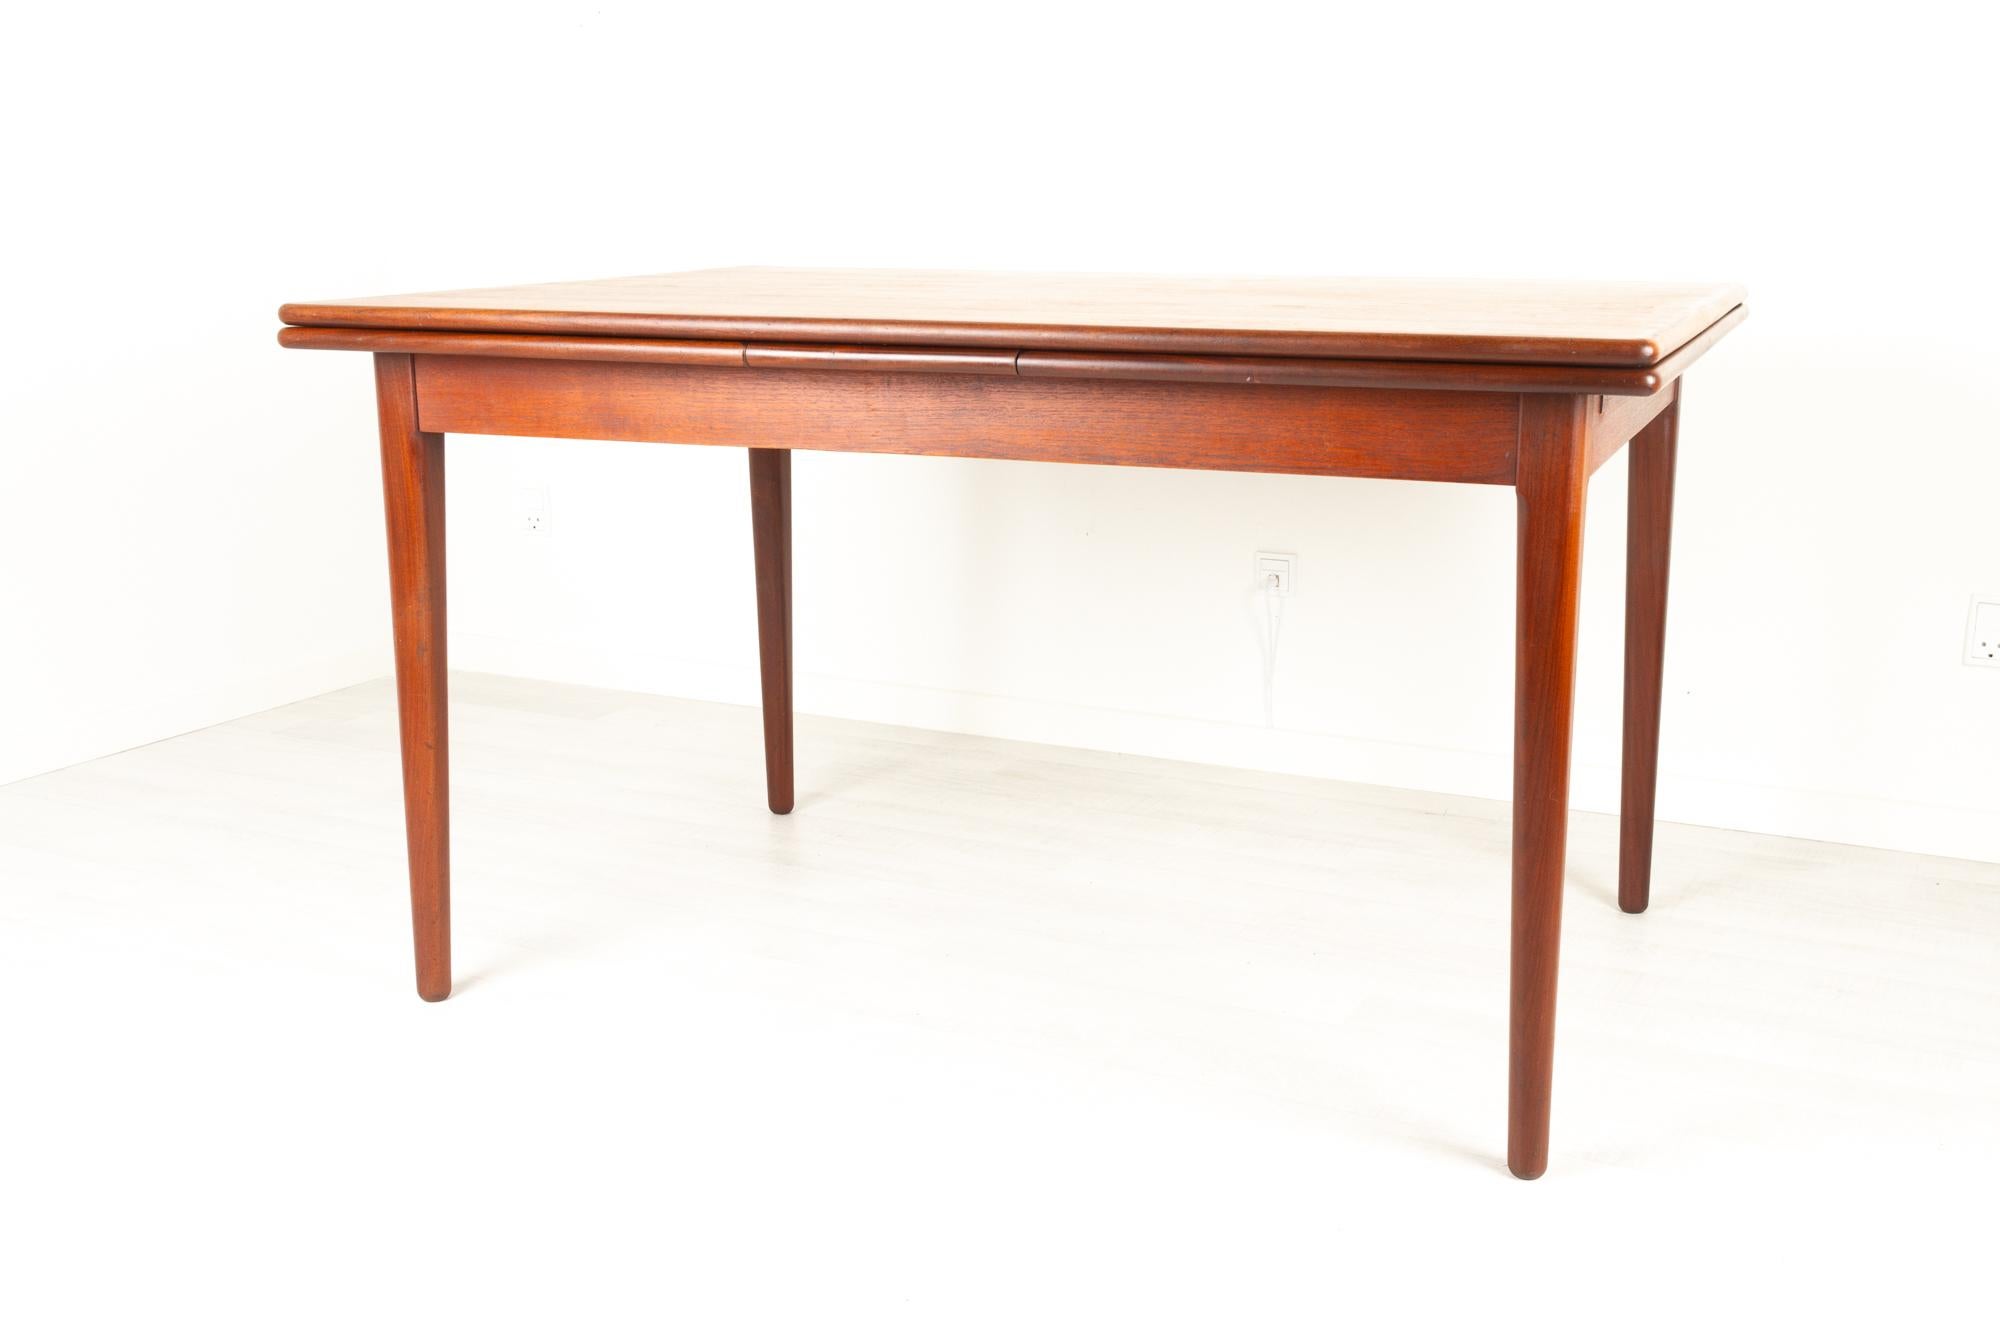 Danish teak dining table, 1960s
Vintage Danish modern extendable dining table. Two draw out extension leaves. Rounded tapered legs with beautiful profile. Very good hand built quality. 
Table extends to 237 cm. Leaves pull out very smooth and